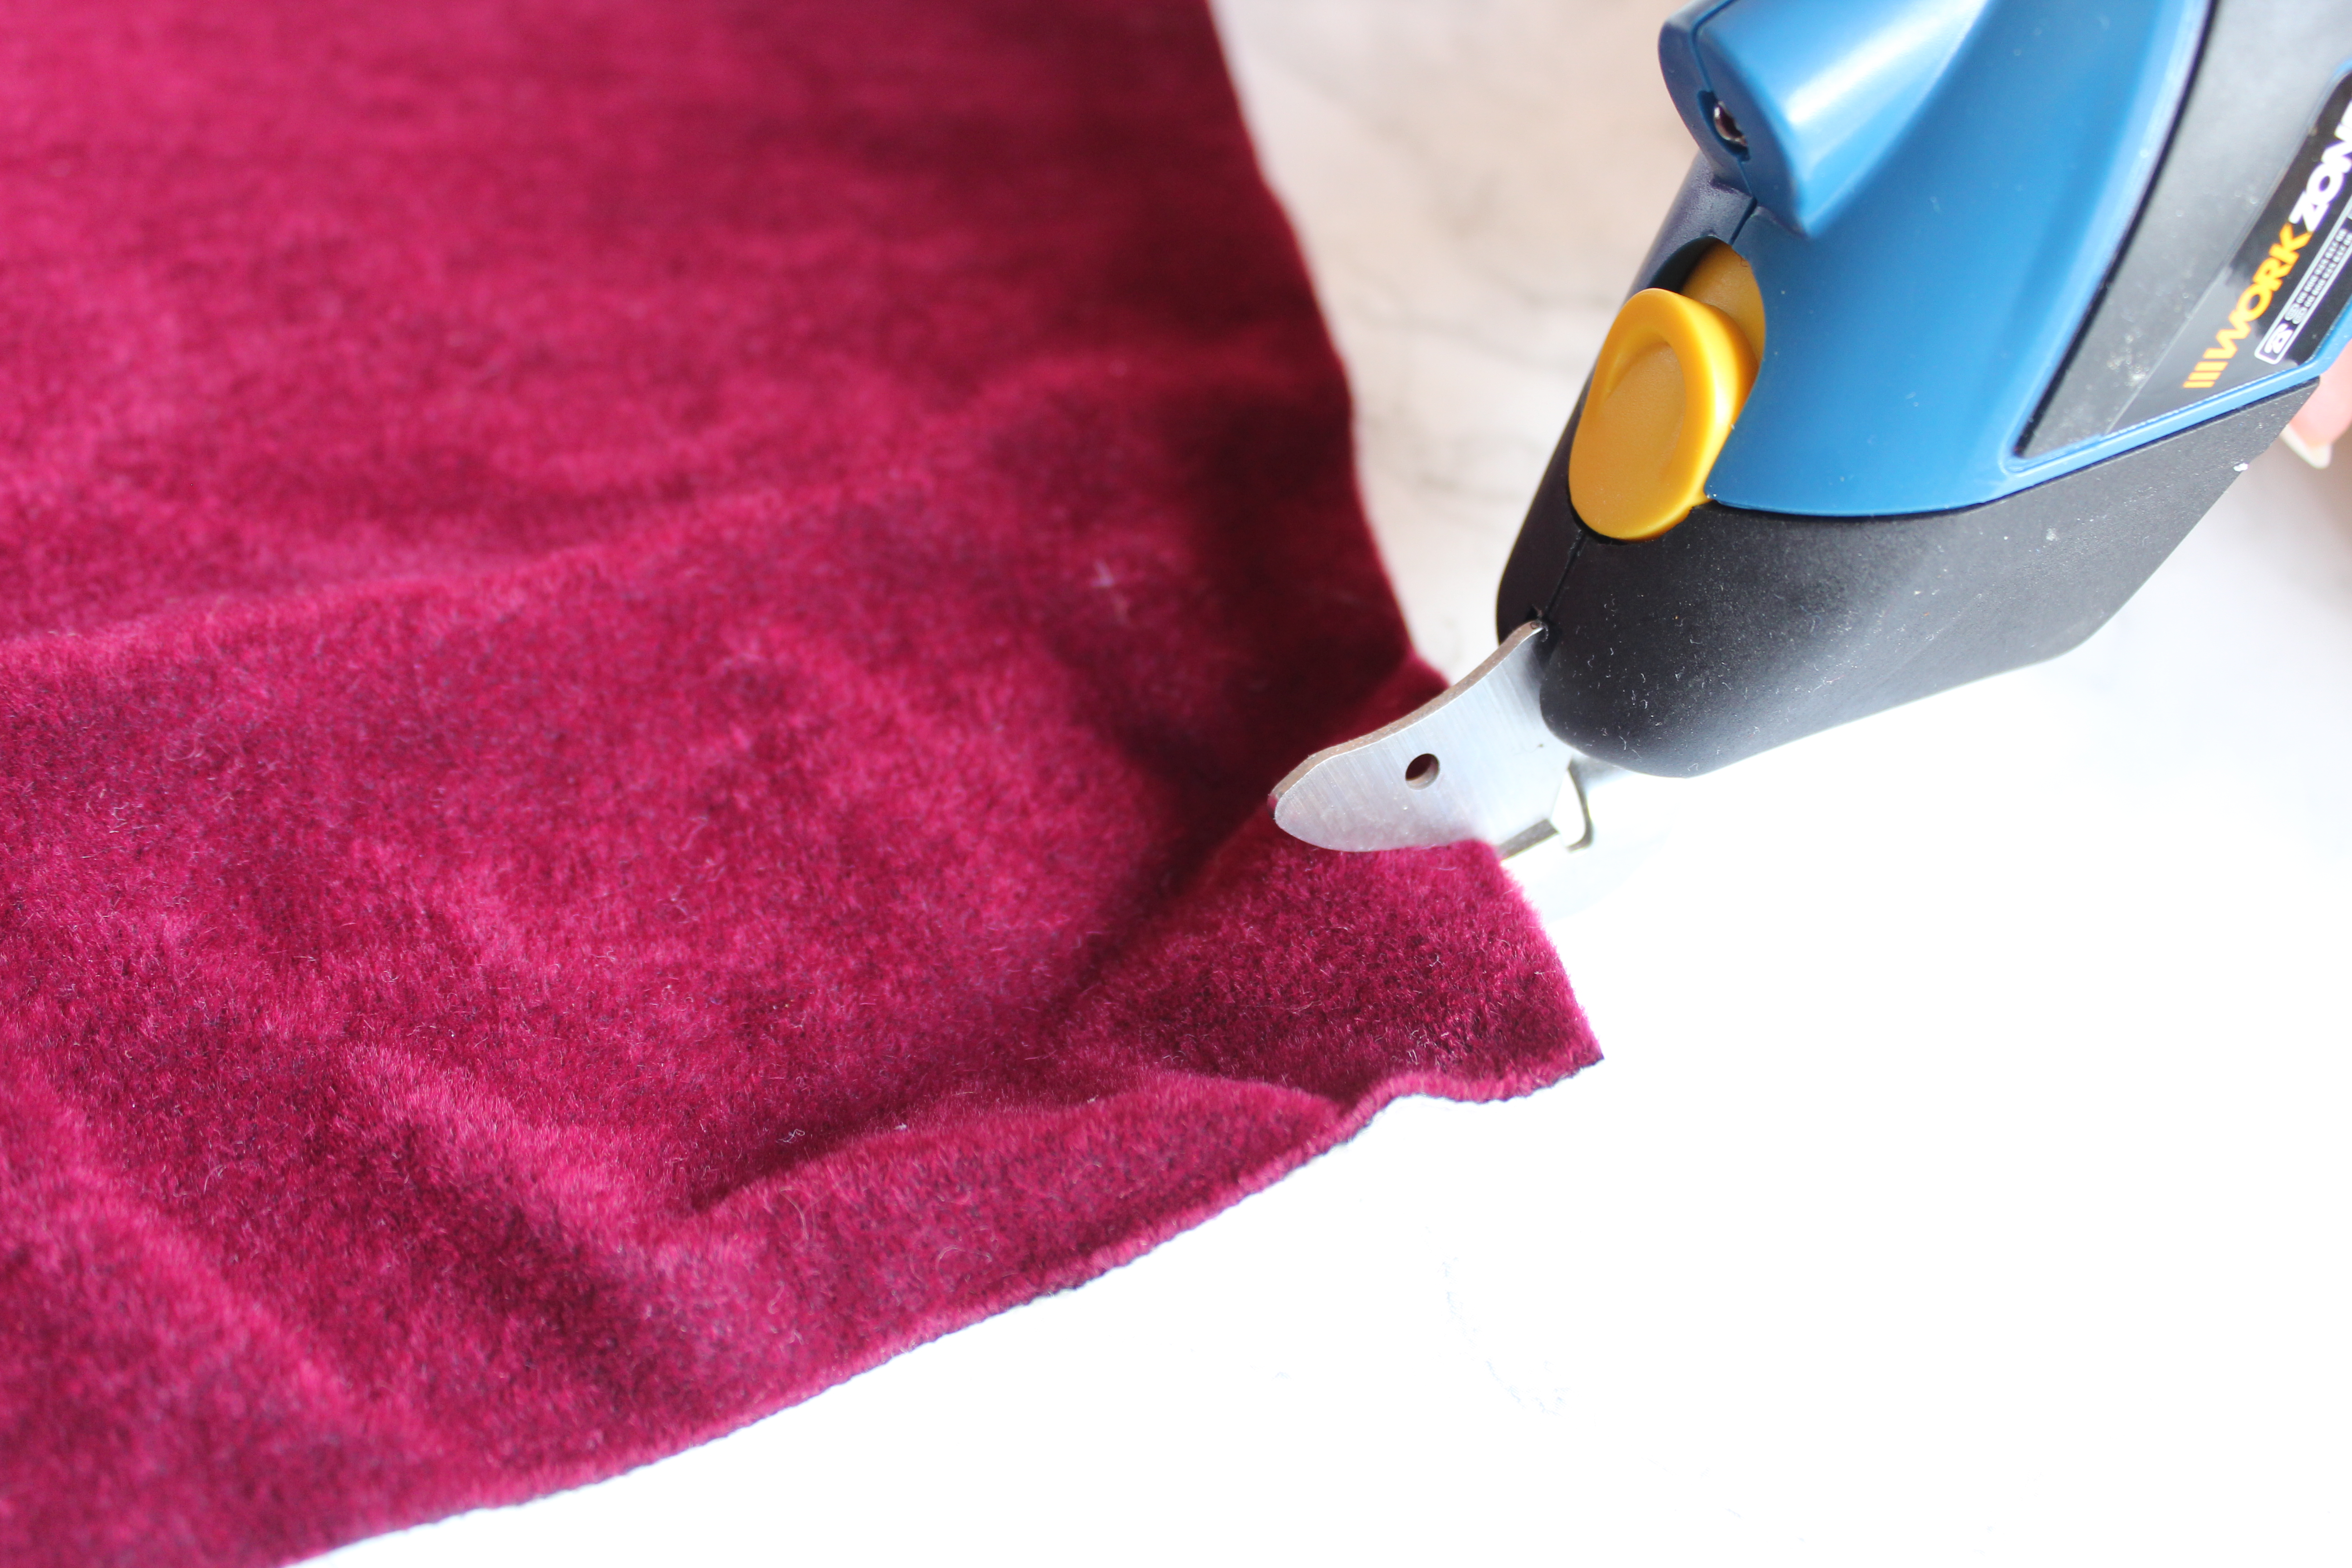 Cutting thick red curtain fabric with the Aldi Workzone Cordless Cutter